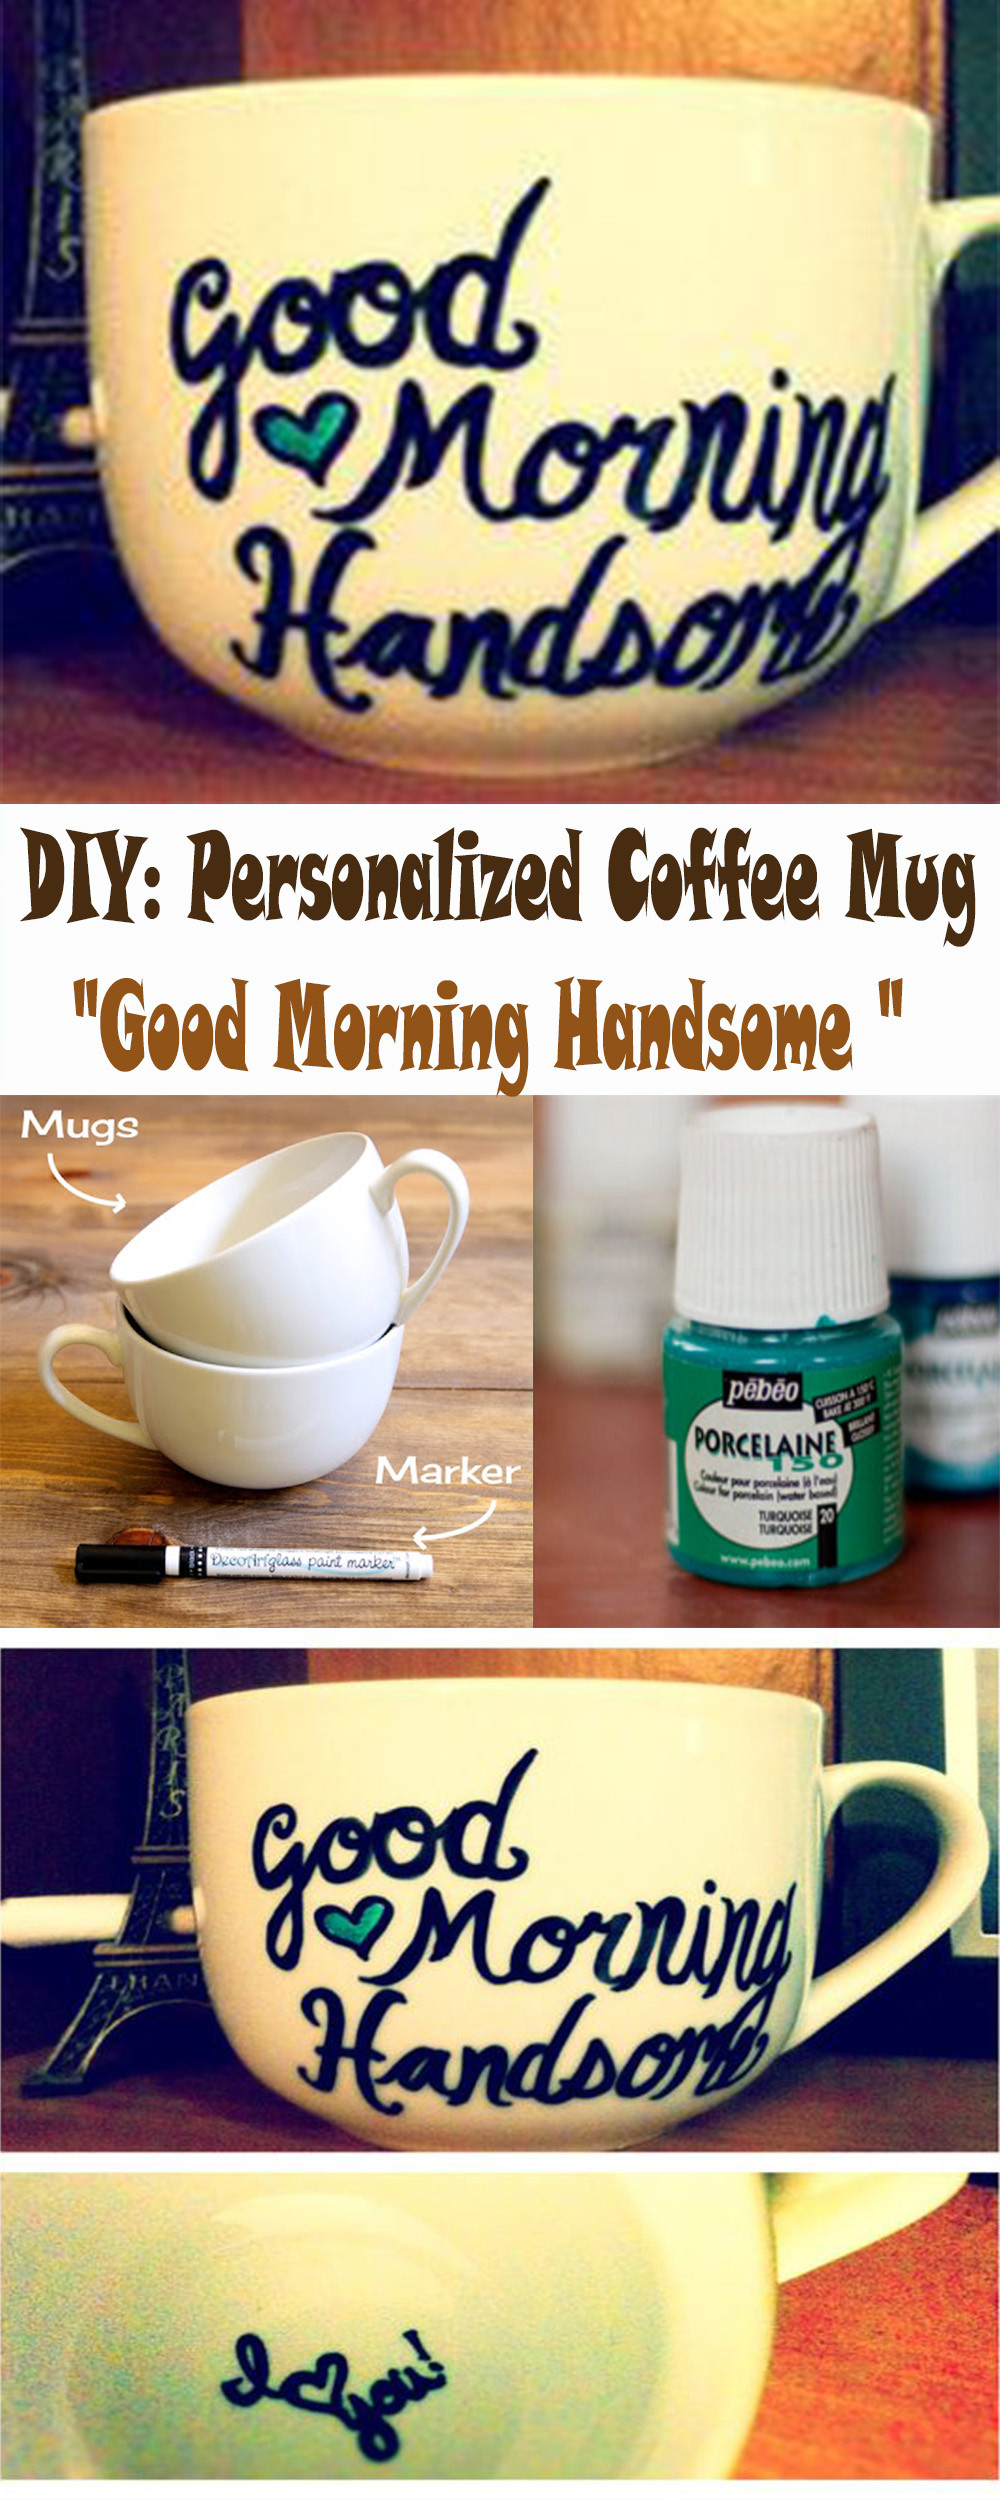 Personalized Gift Ideas For Boyfriend
 Romantic Gift For Boyfriend DIY “Good Morning Handsome